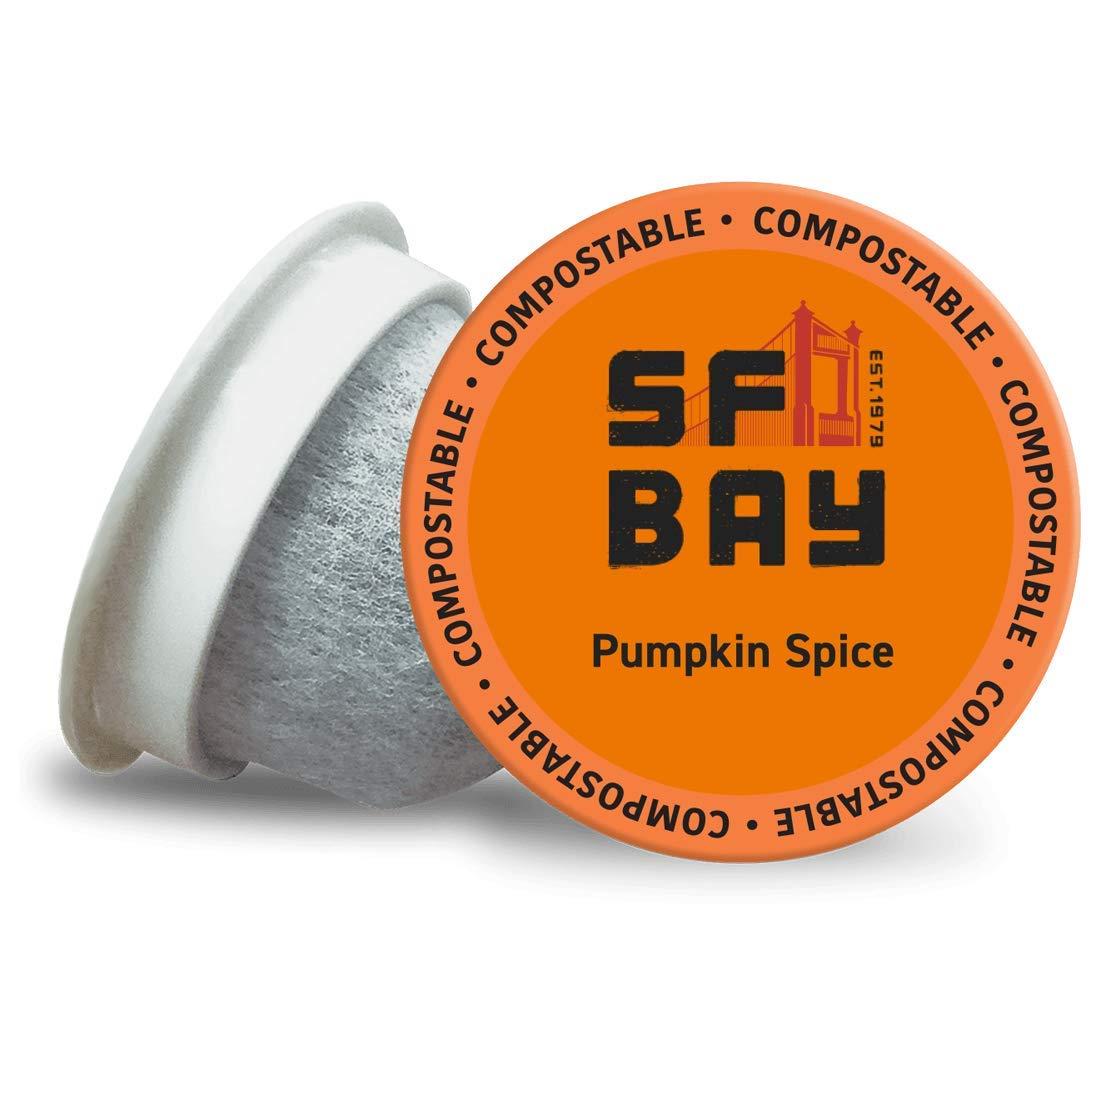 80 SF Bay Coffee Pumpkin Spice K-Cup Pods for $23.39 Shipped